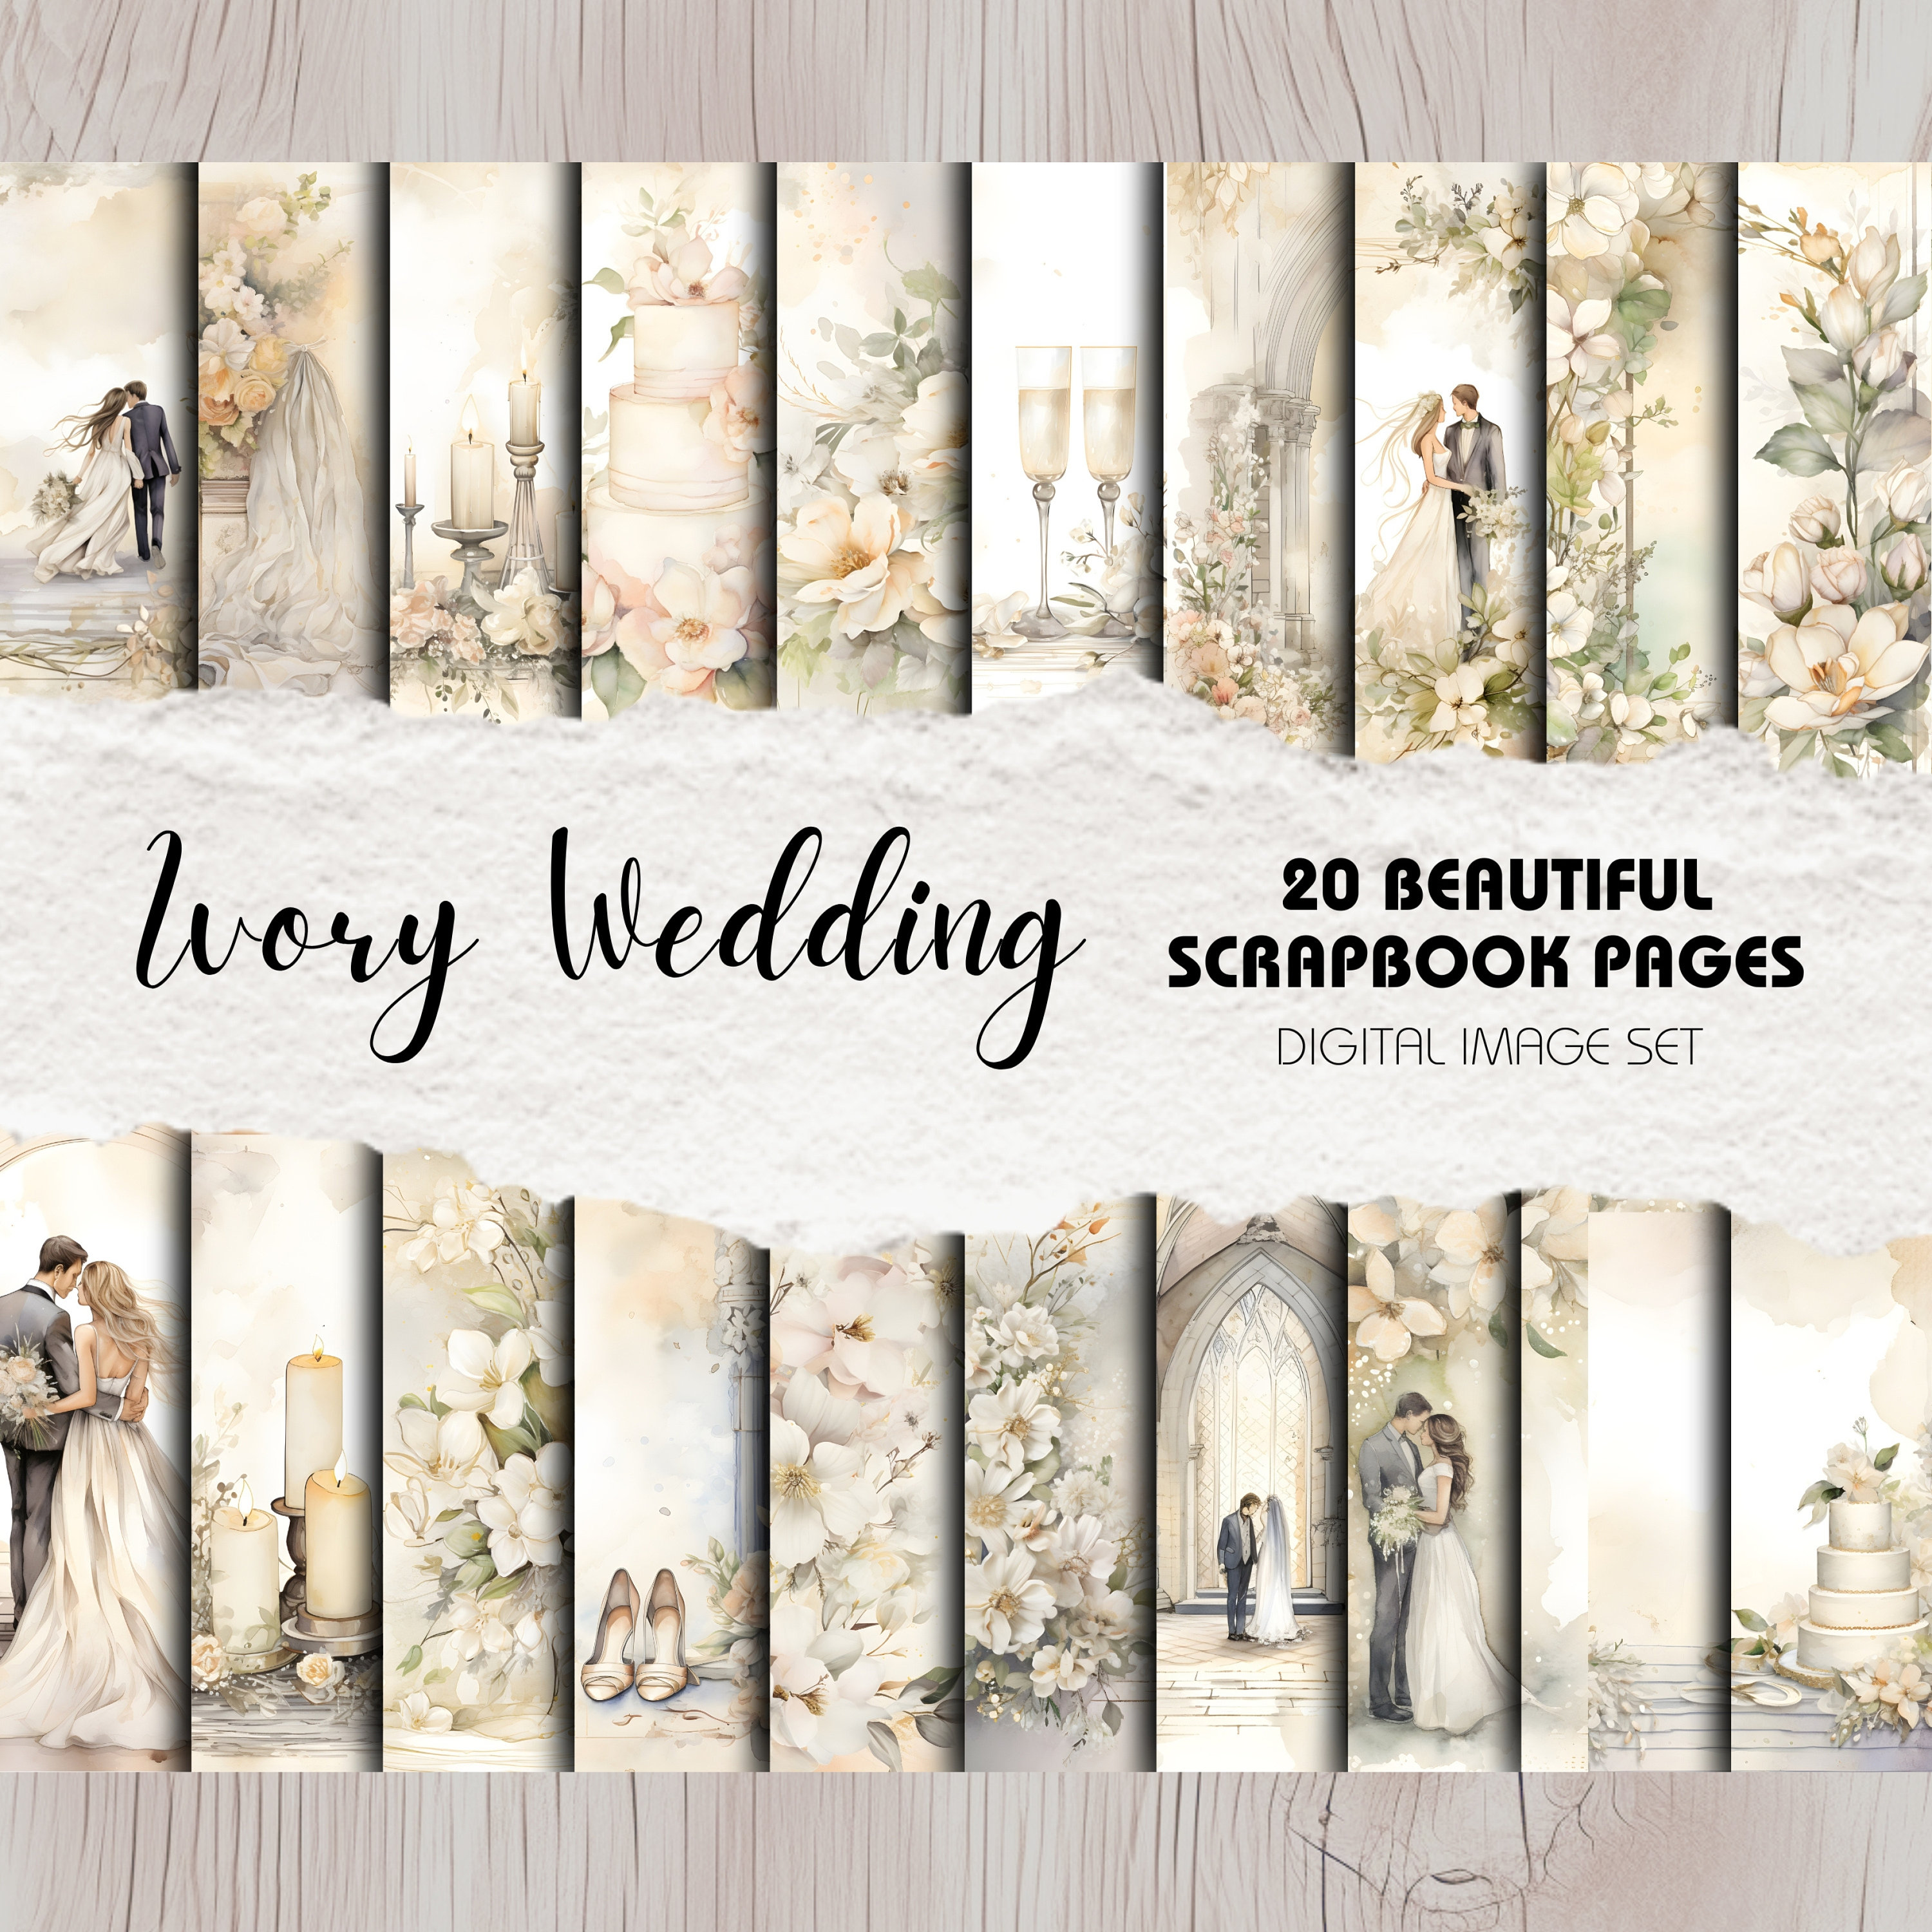 Bring Your Love to Life with Ever After Wedding Scrapbook Papers  Wedding  scrapbook pages, Wedding scrapbook paper, Bridal shower scrapbook